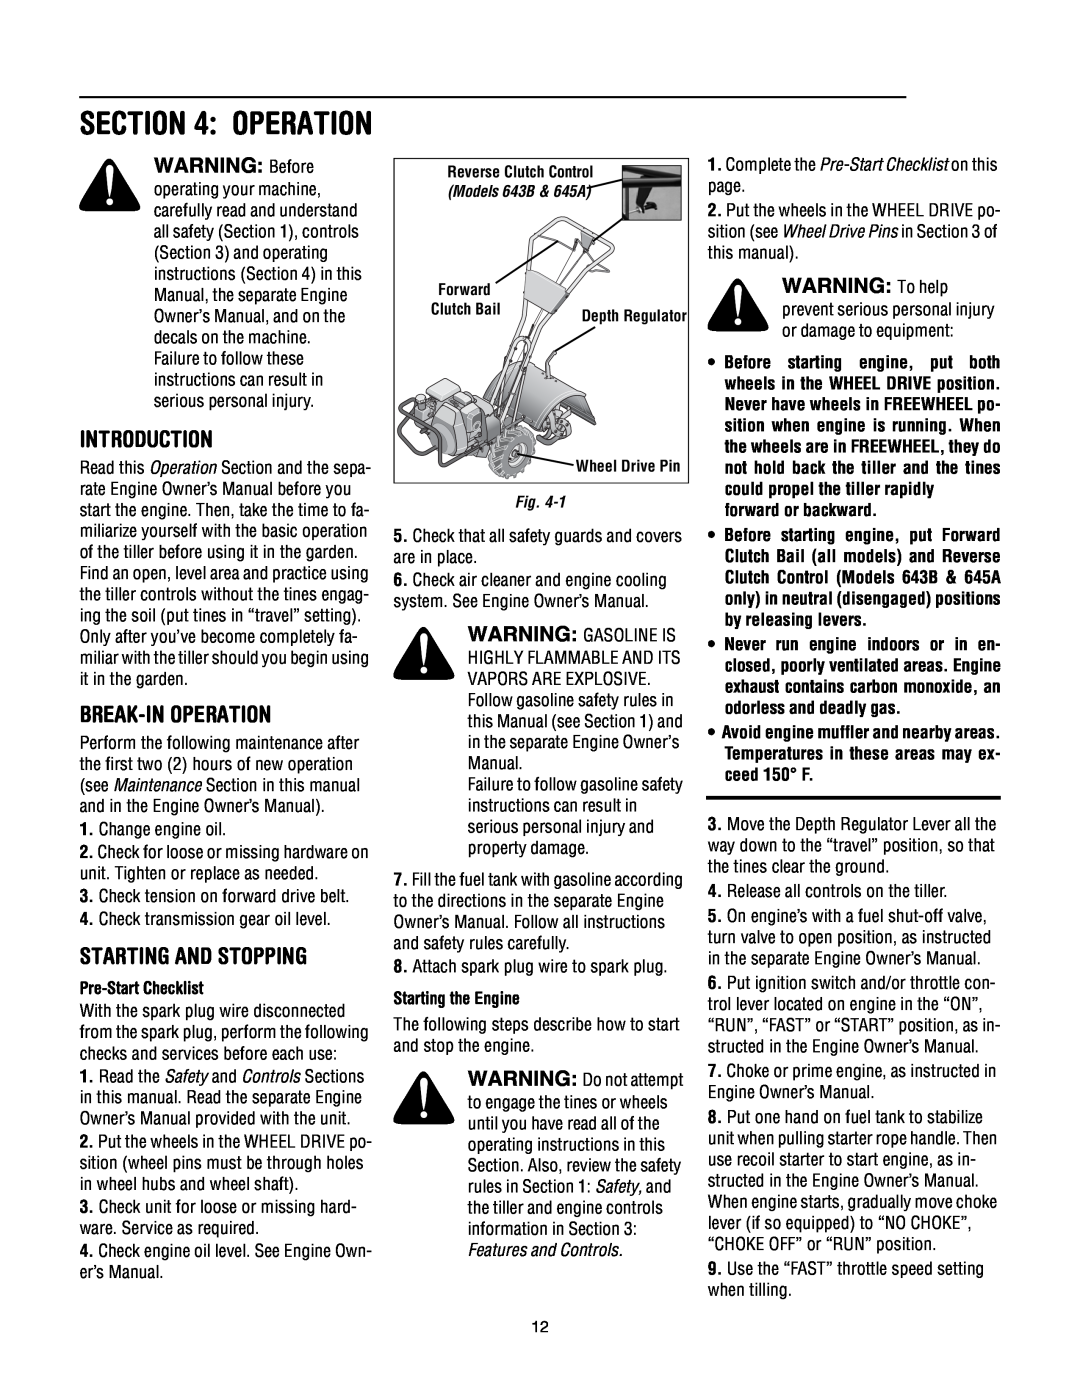 Troy-Bilt 645A Break-In Operation, Starting And Stopping, WARNING To help, Pre-Start Checklist, Starting the Engine 